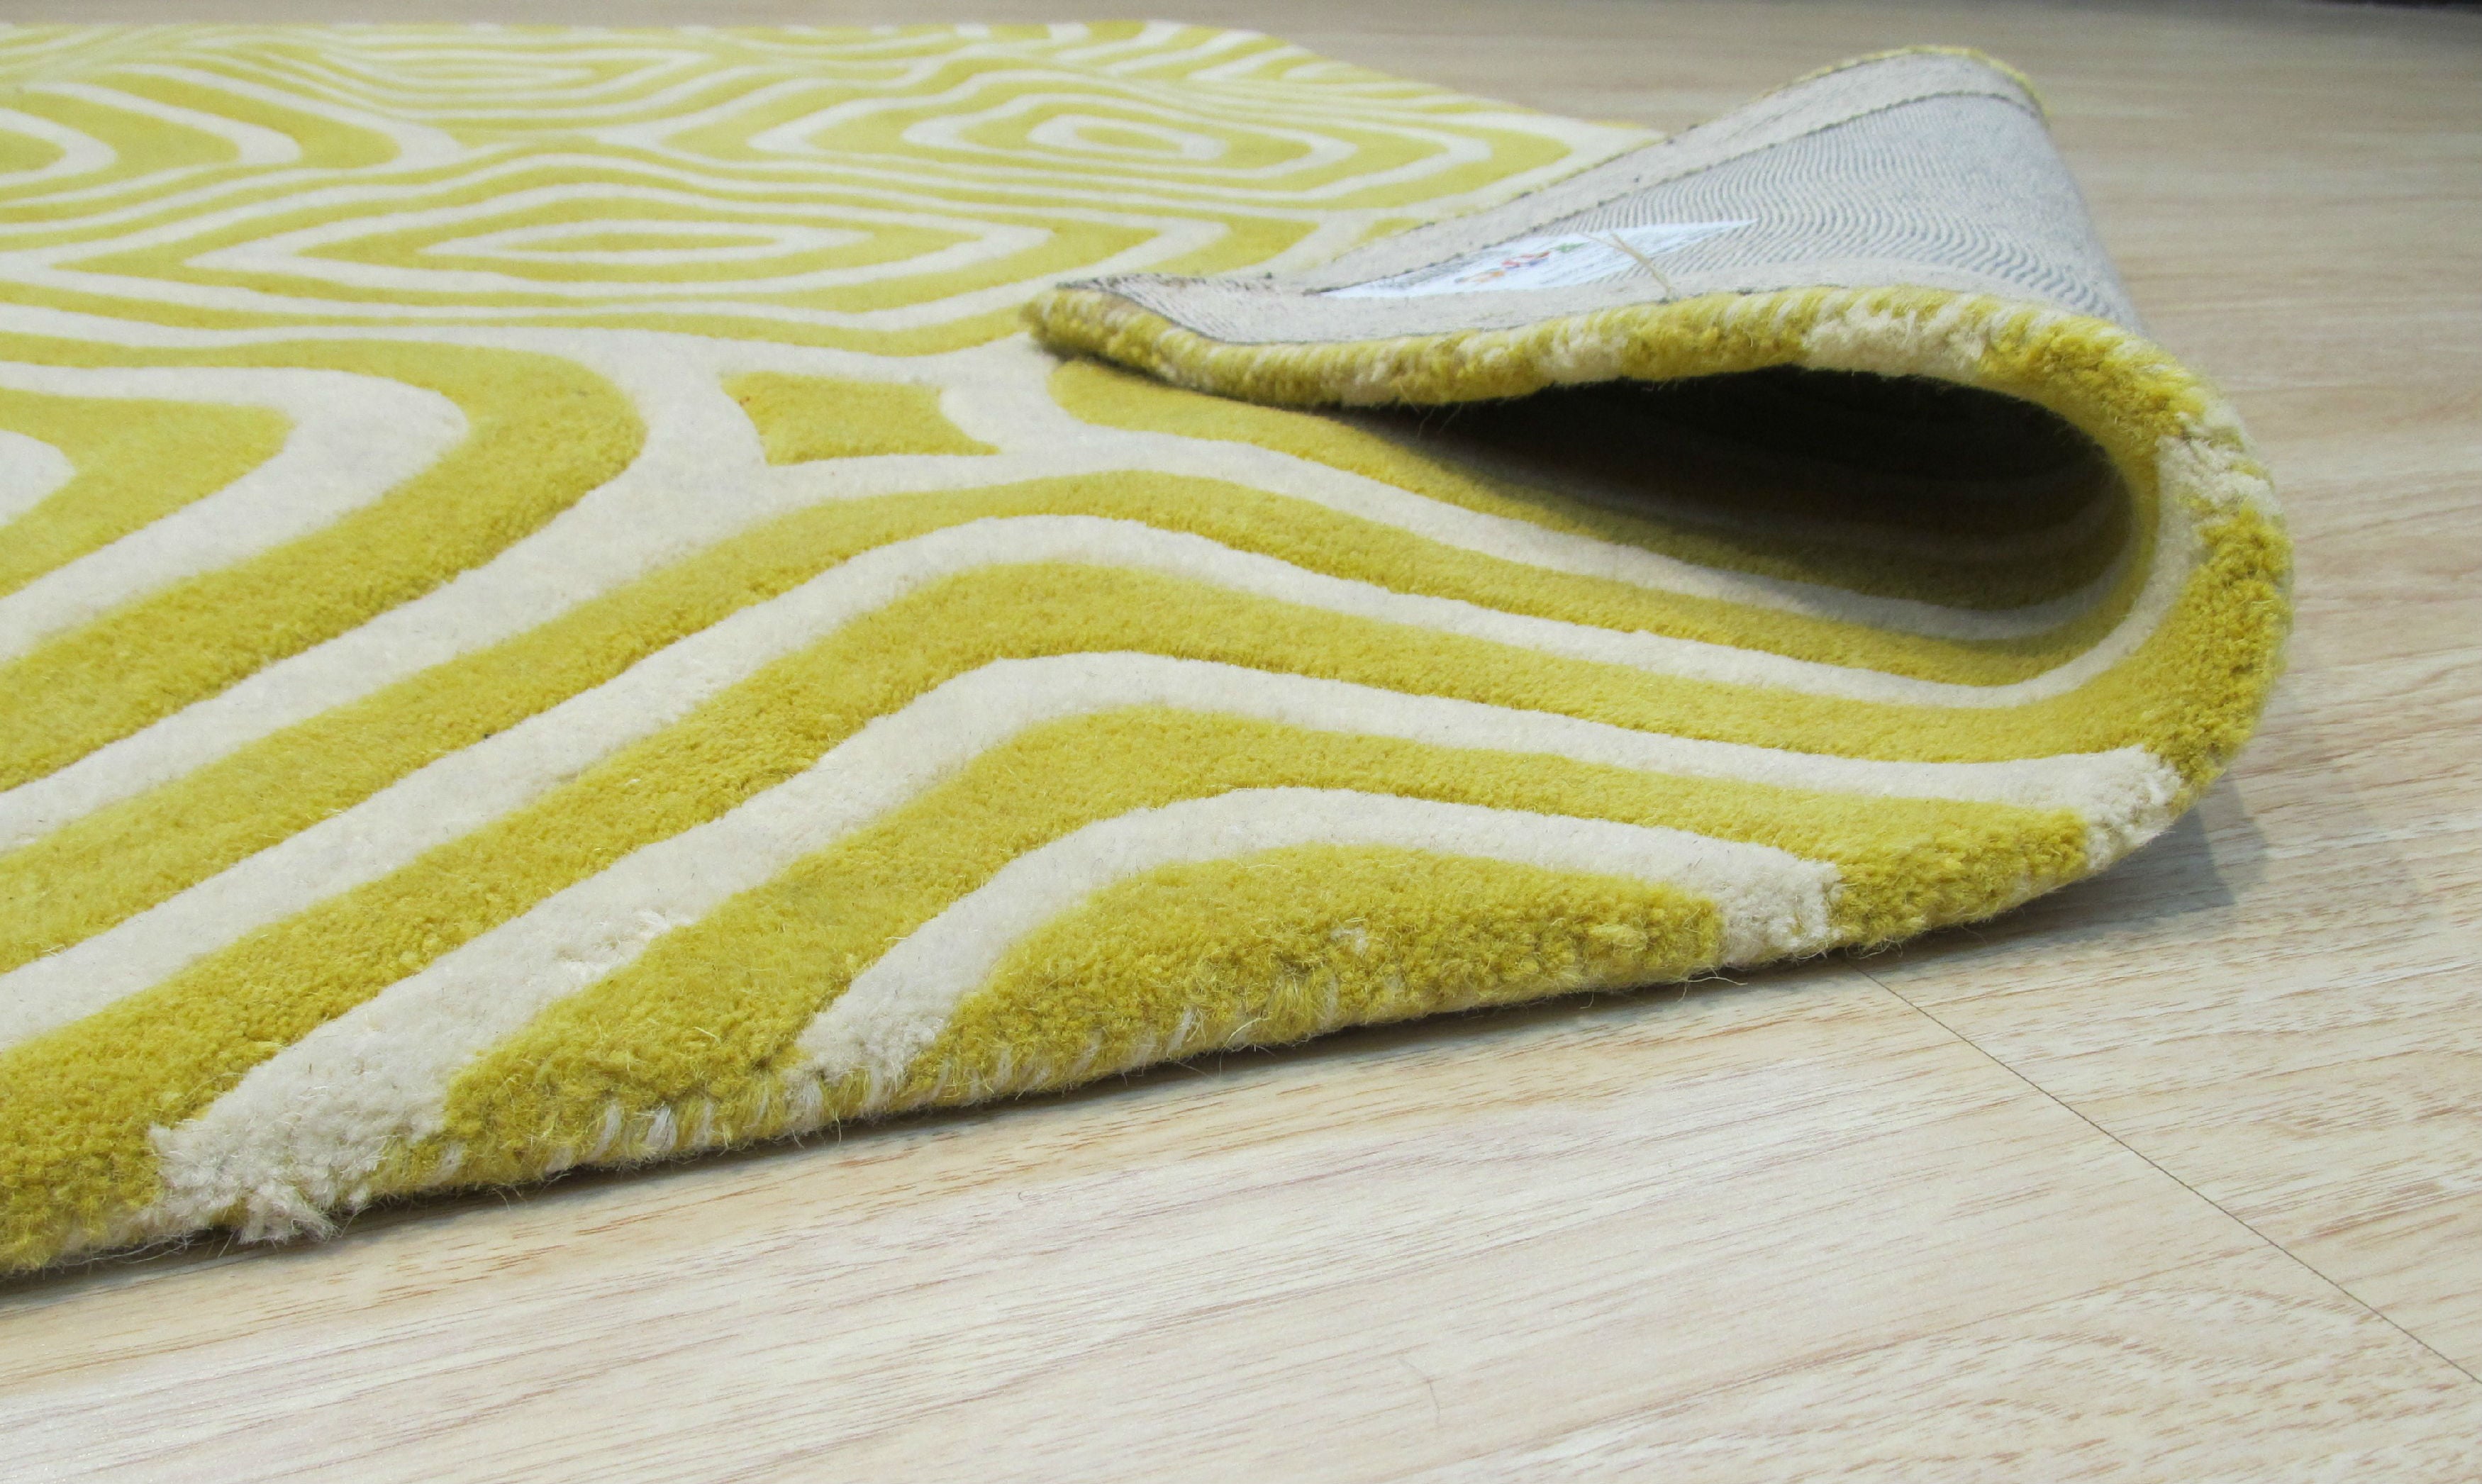 EORC Hand-tufted Wool Yellow Transitional Geometric Marla Rug